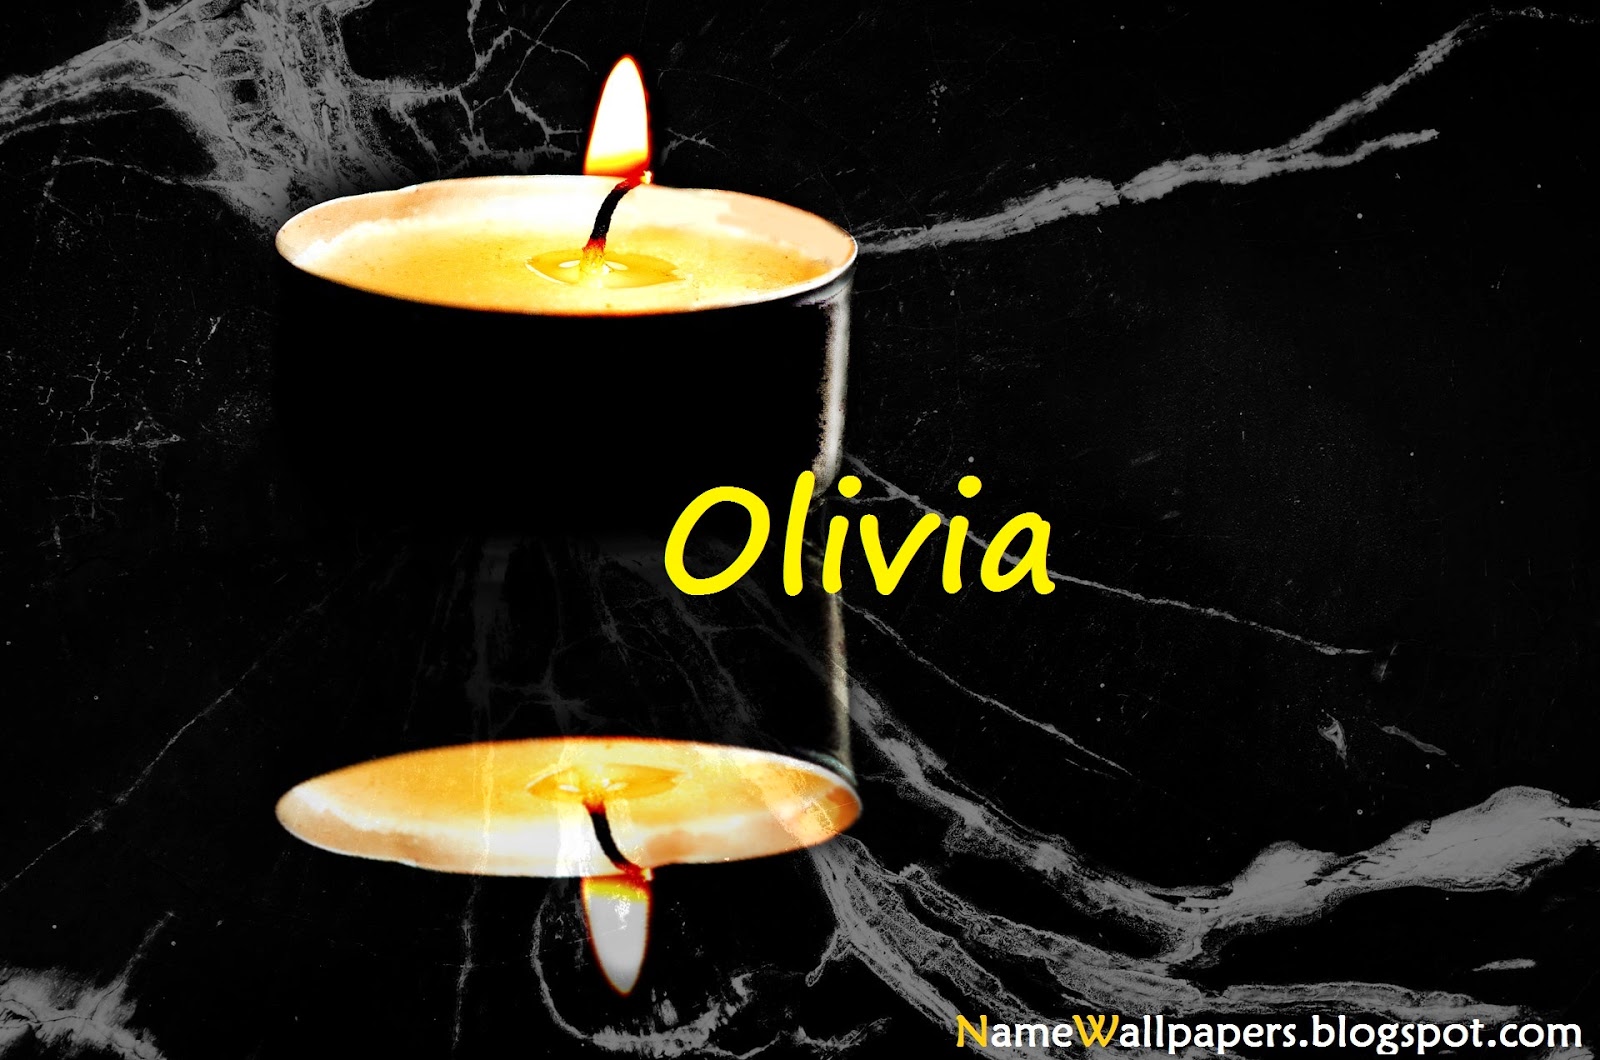 Olivia Name Wallpapers Olivia ~ Name Wallpaper Urdu Name Meaning Name